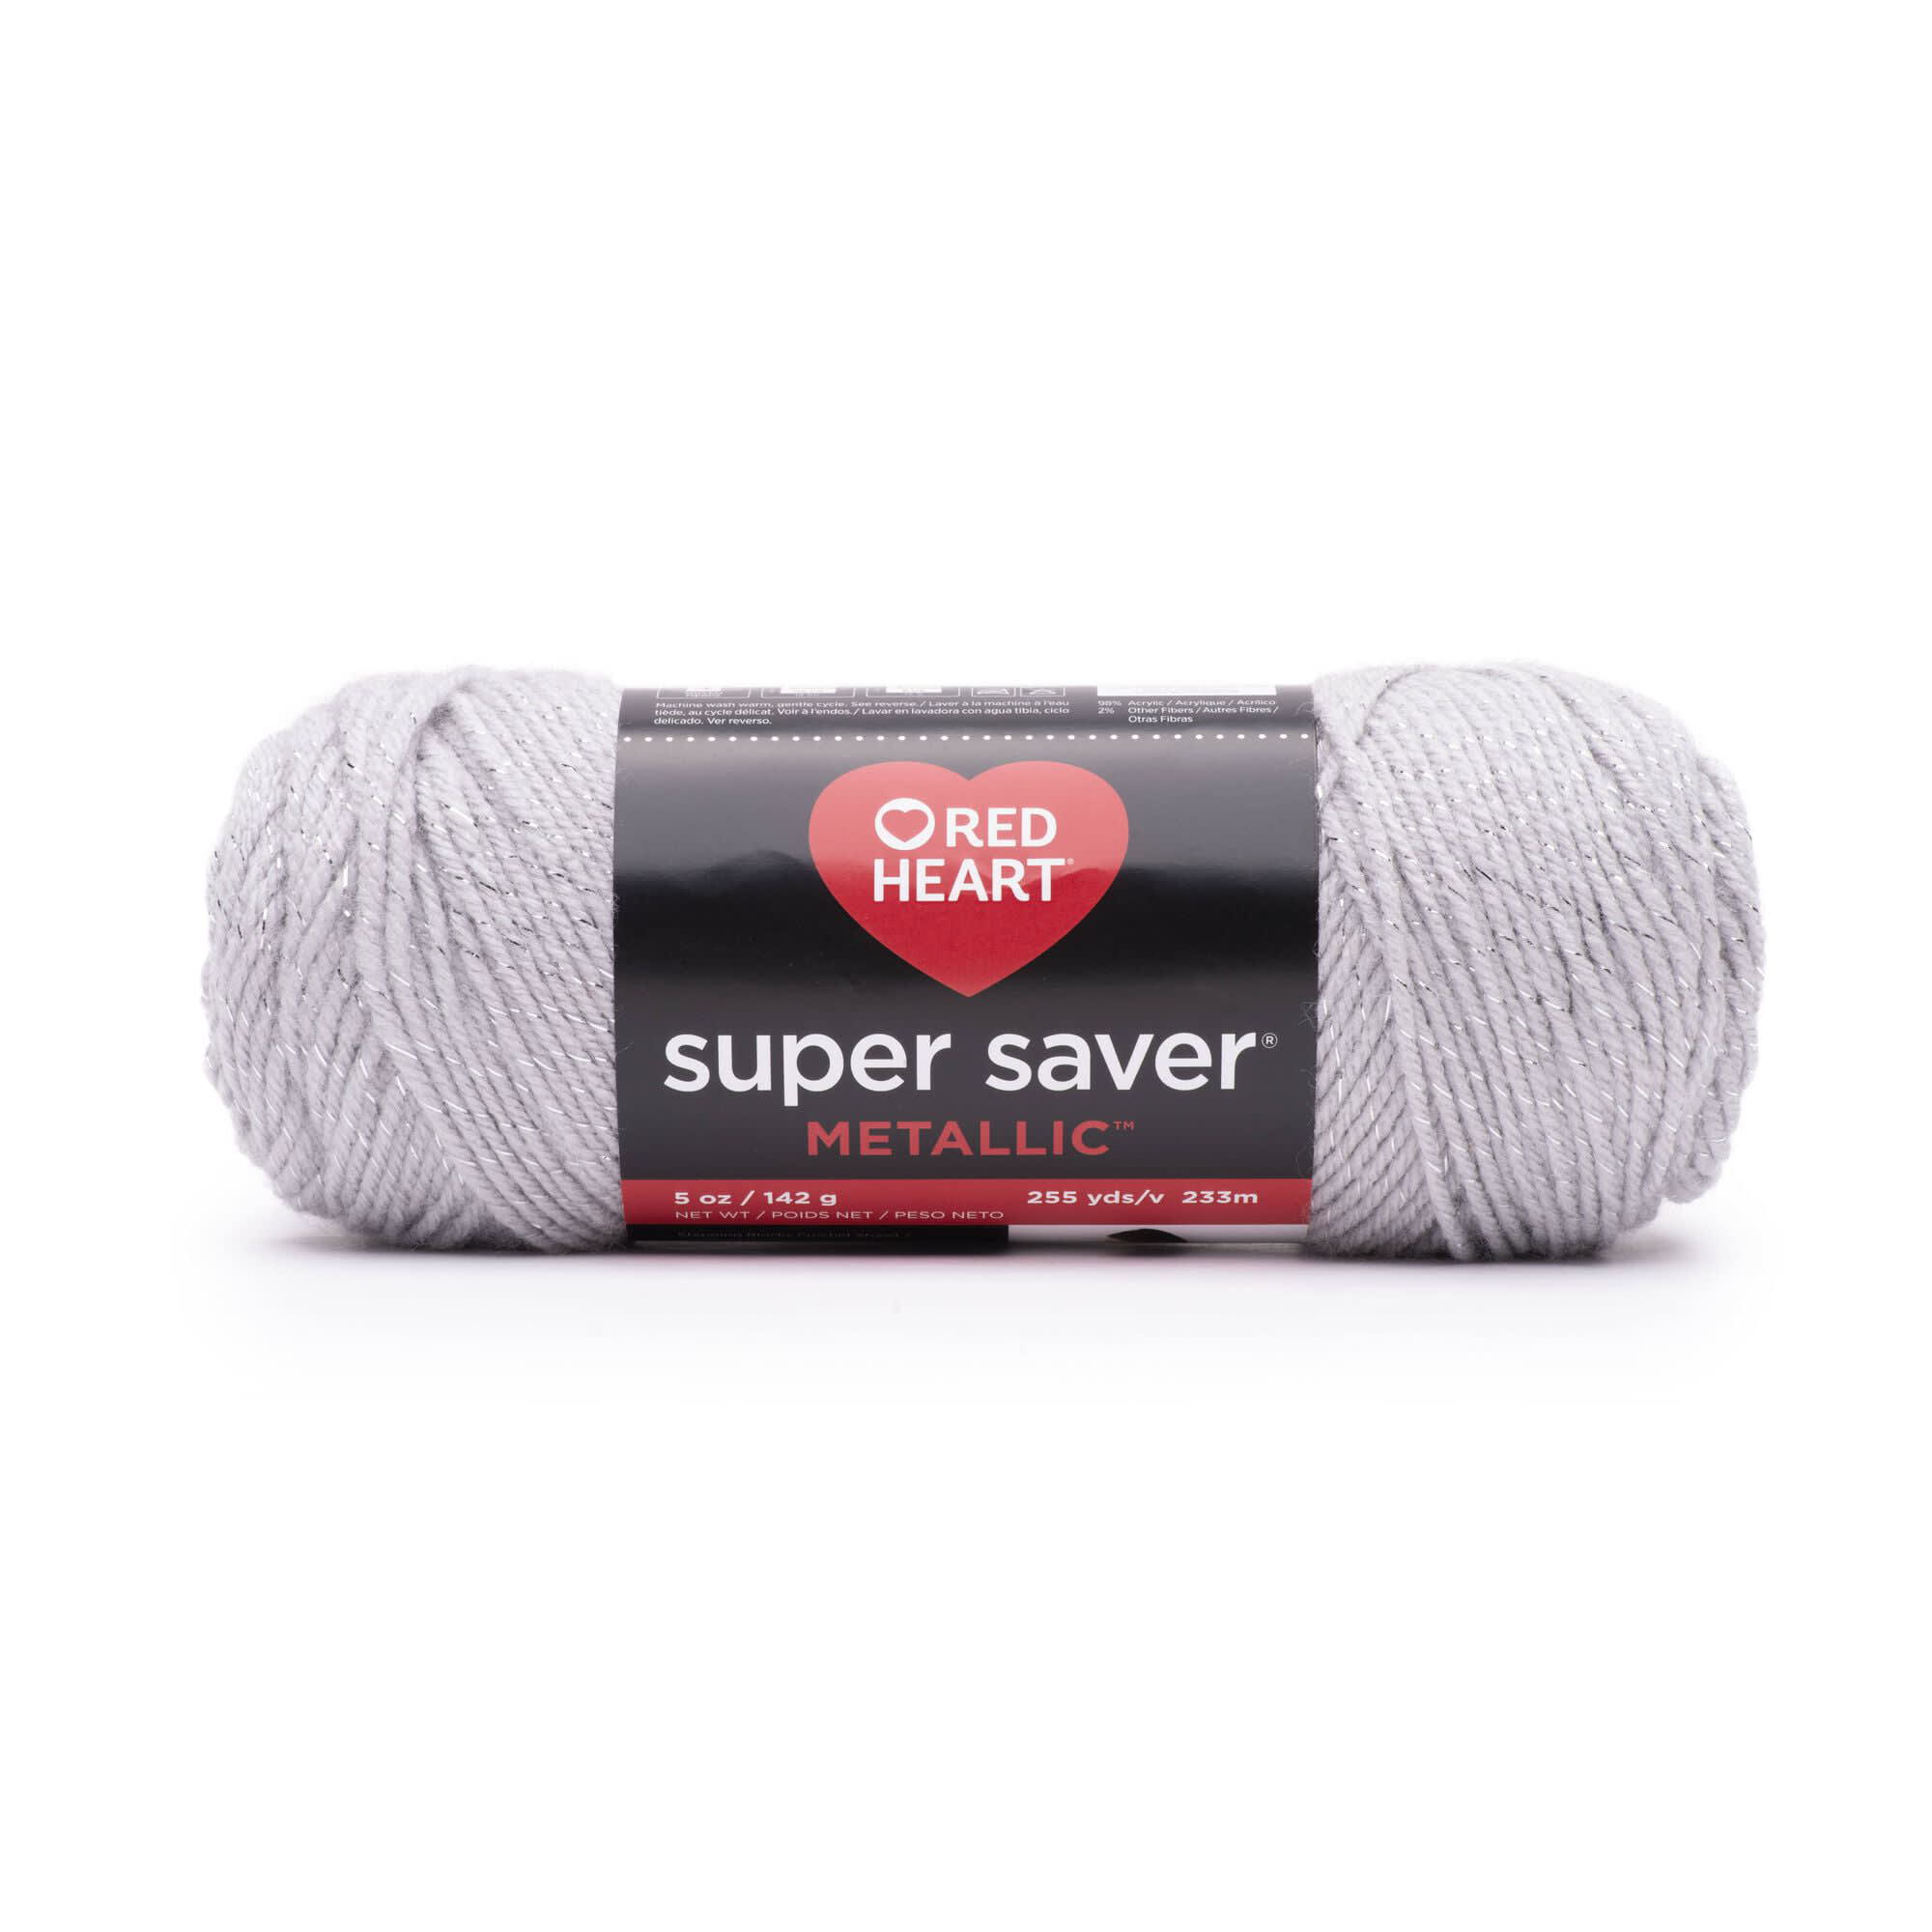 Super Amazing 001 White Yarn and Colors